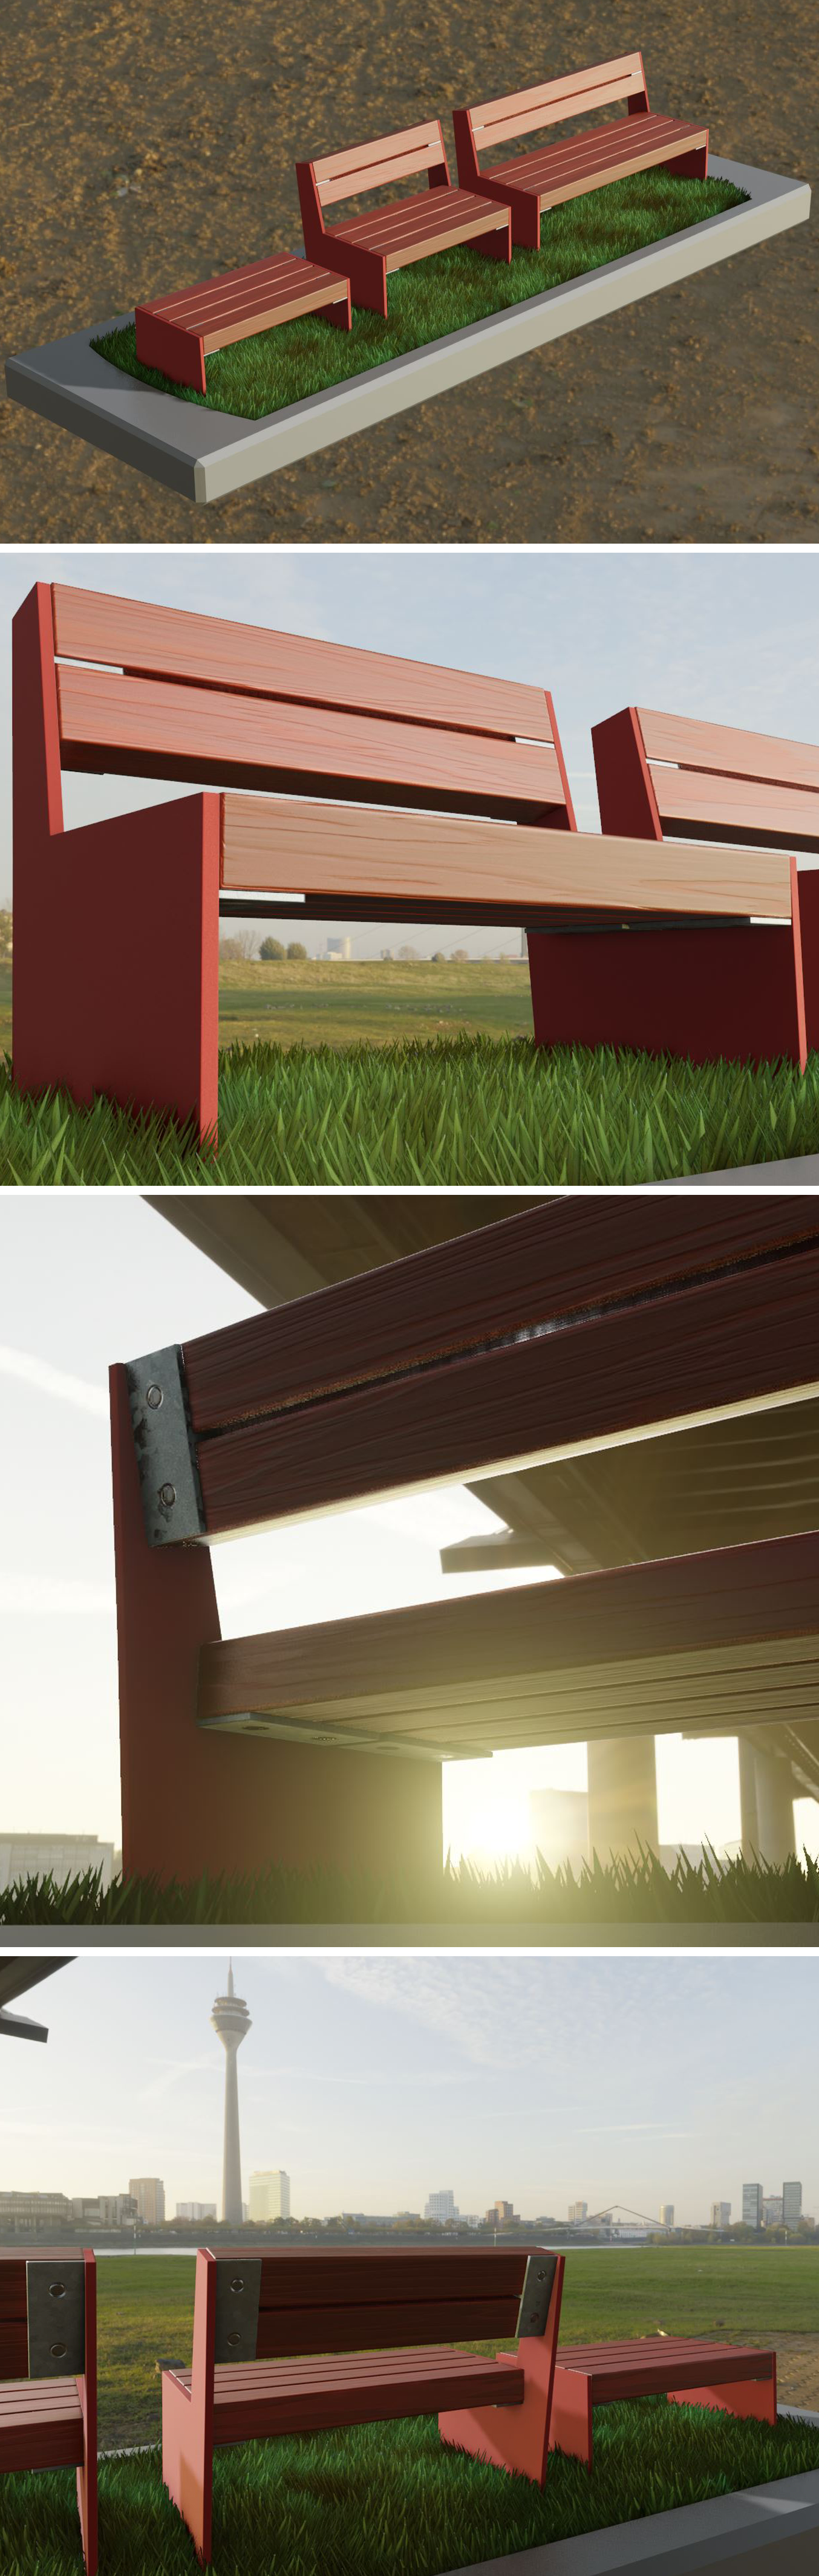 Park Bench [8] Red |Low Poly Version|